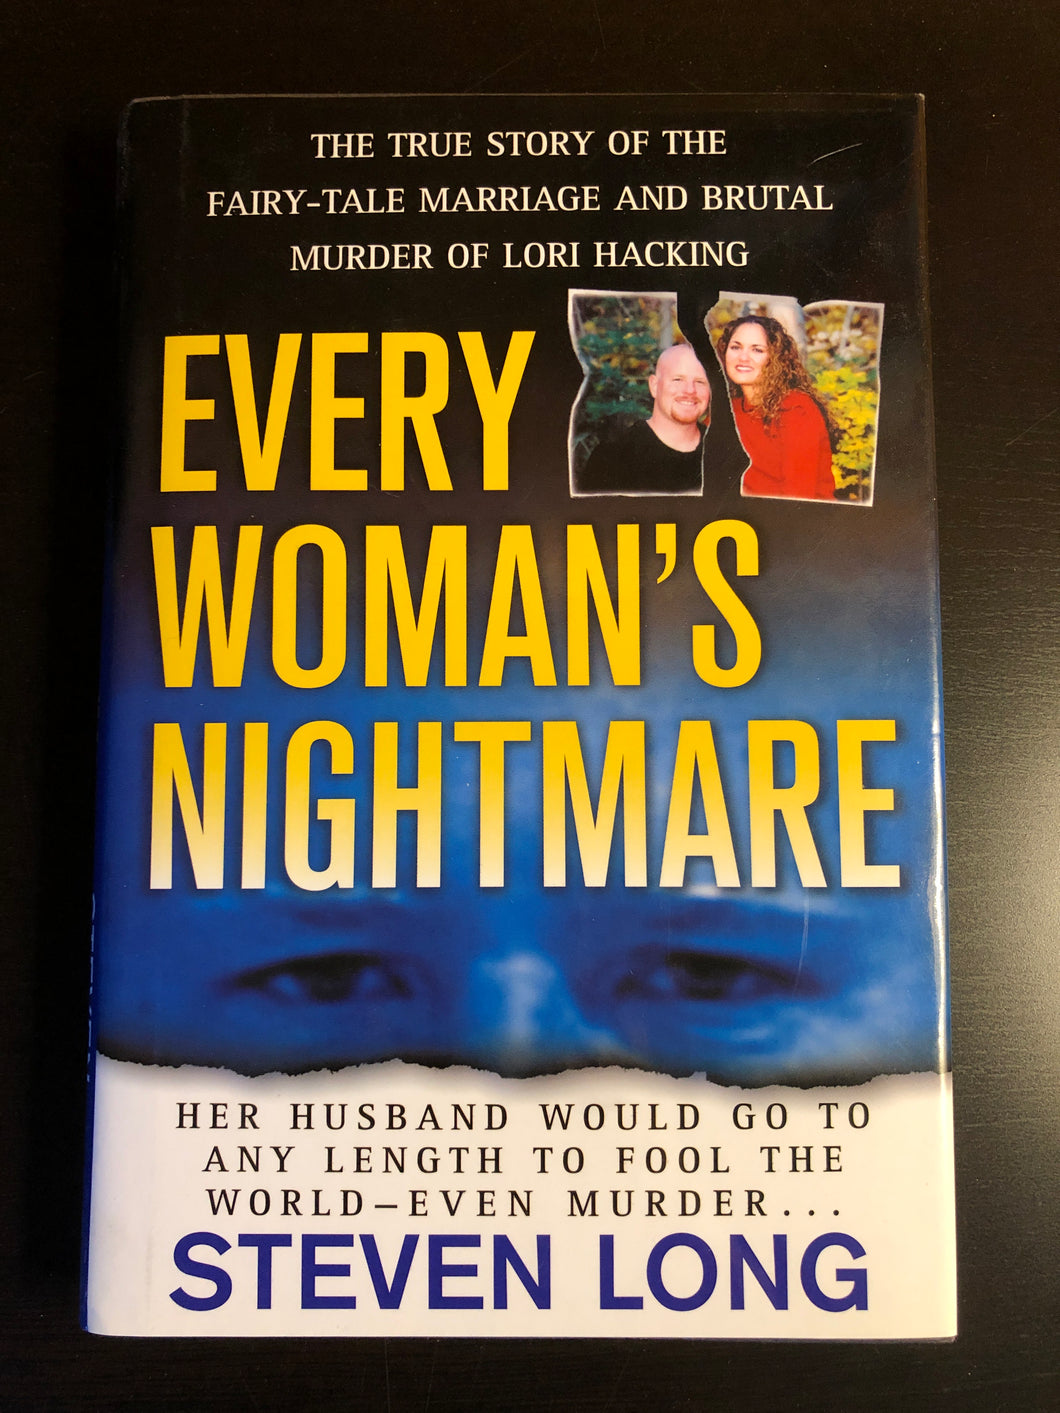 Every Woman's Nightmare: The True Story of the Fairy-Tale Marriage and Brutal Murder of Lori Hacking